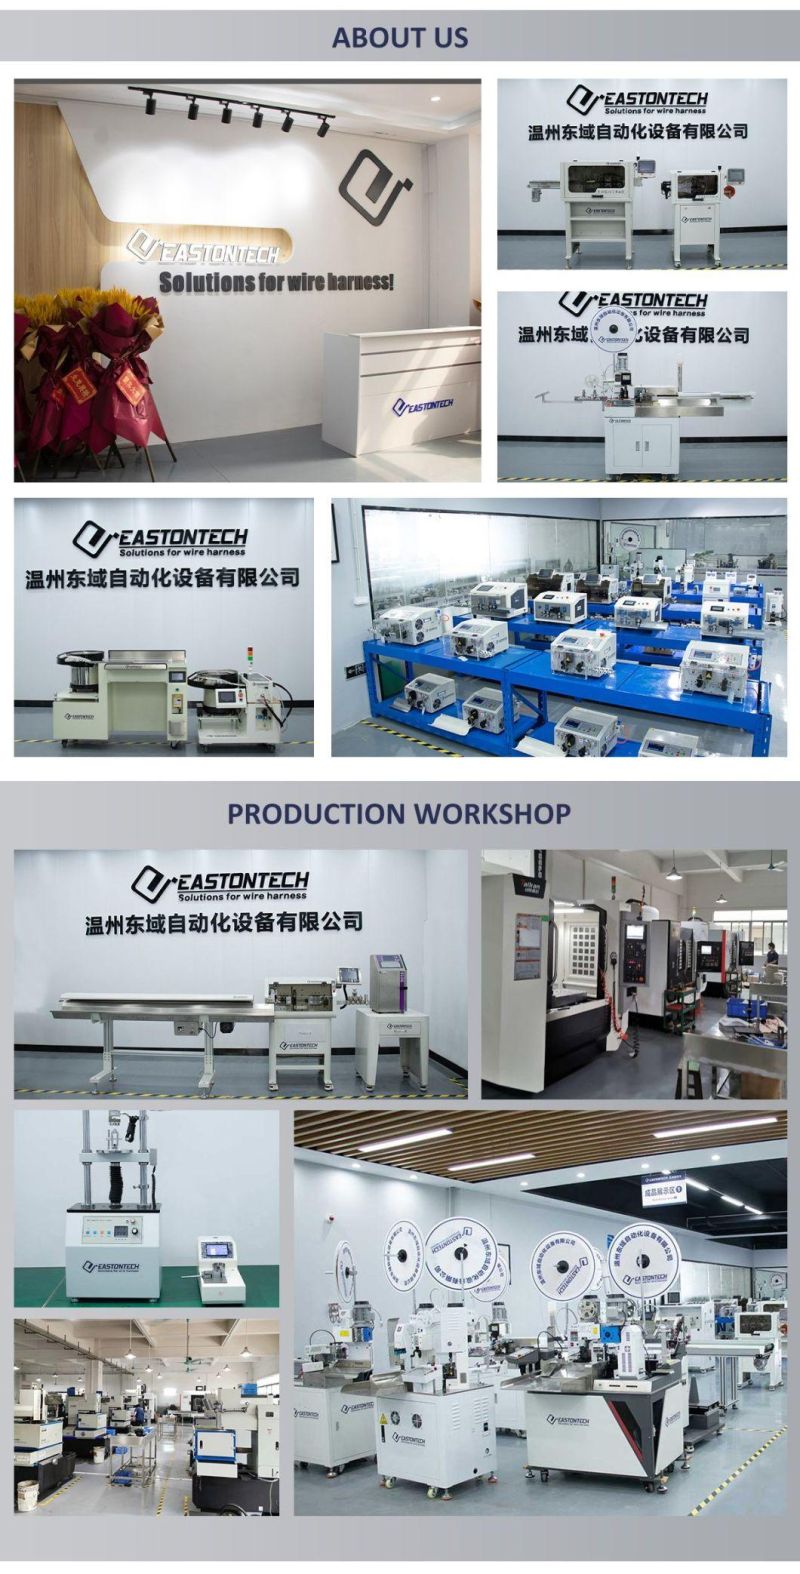 Eastontech Ew-05f Computerized Automatic Double Layers Sheathed Cable Cutting and Wire Stripping Machine